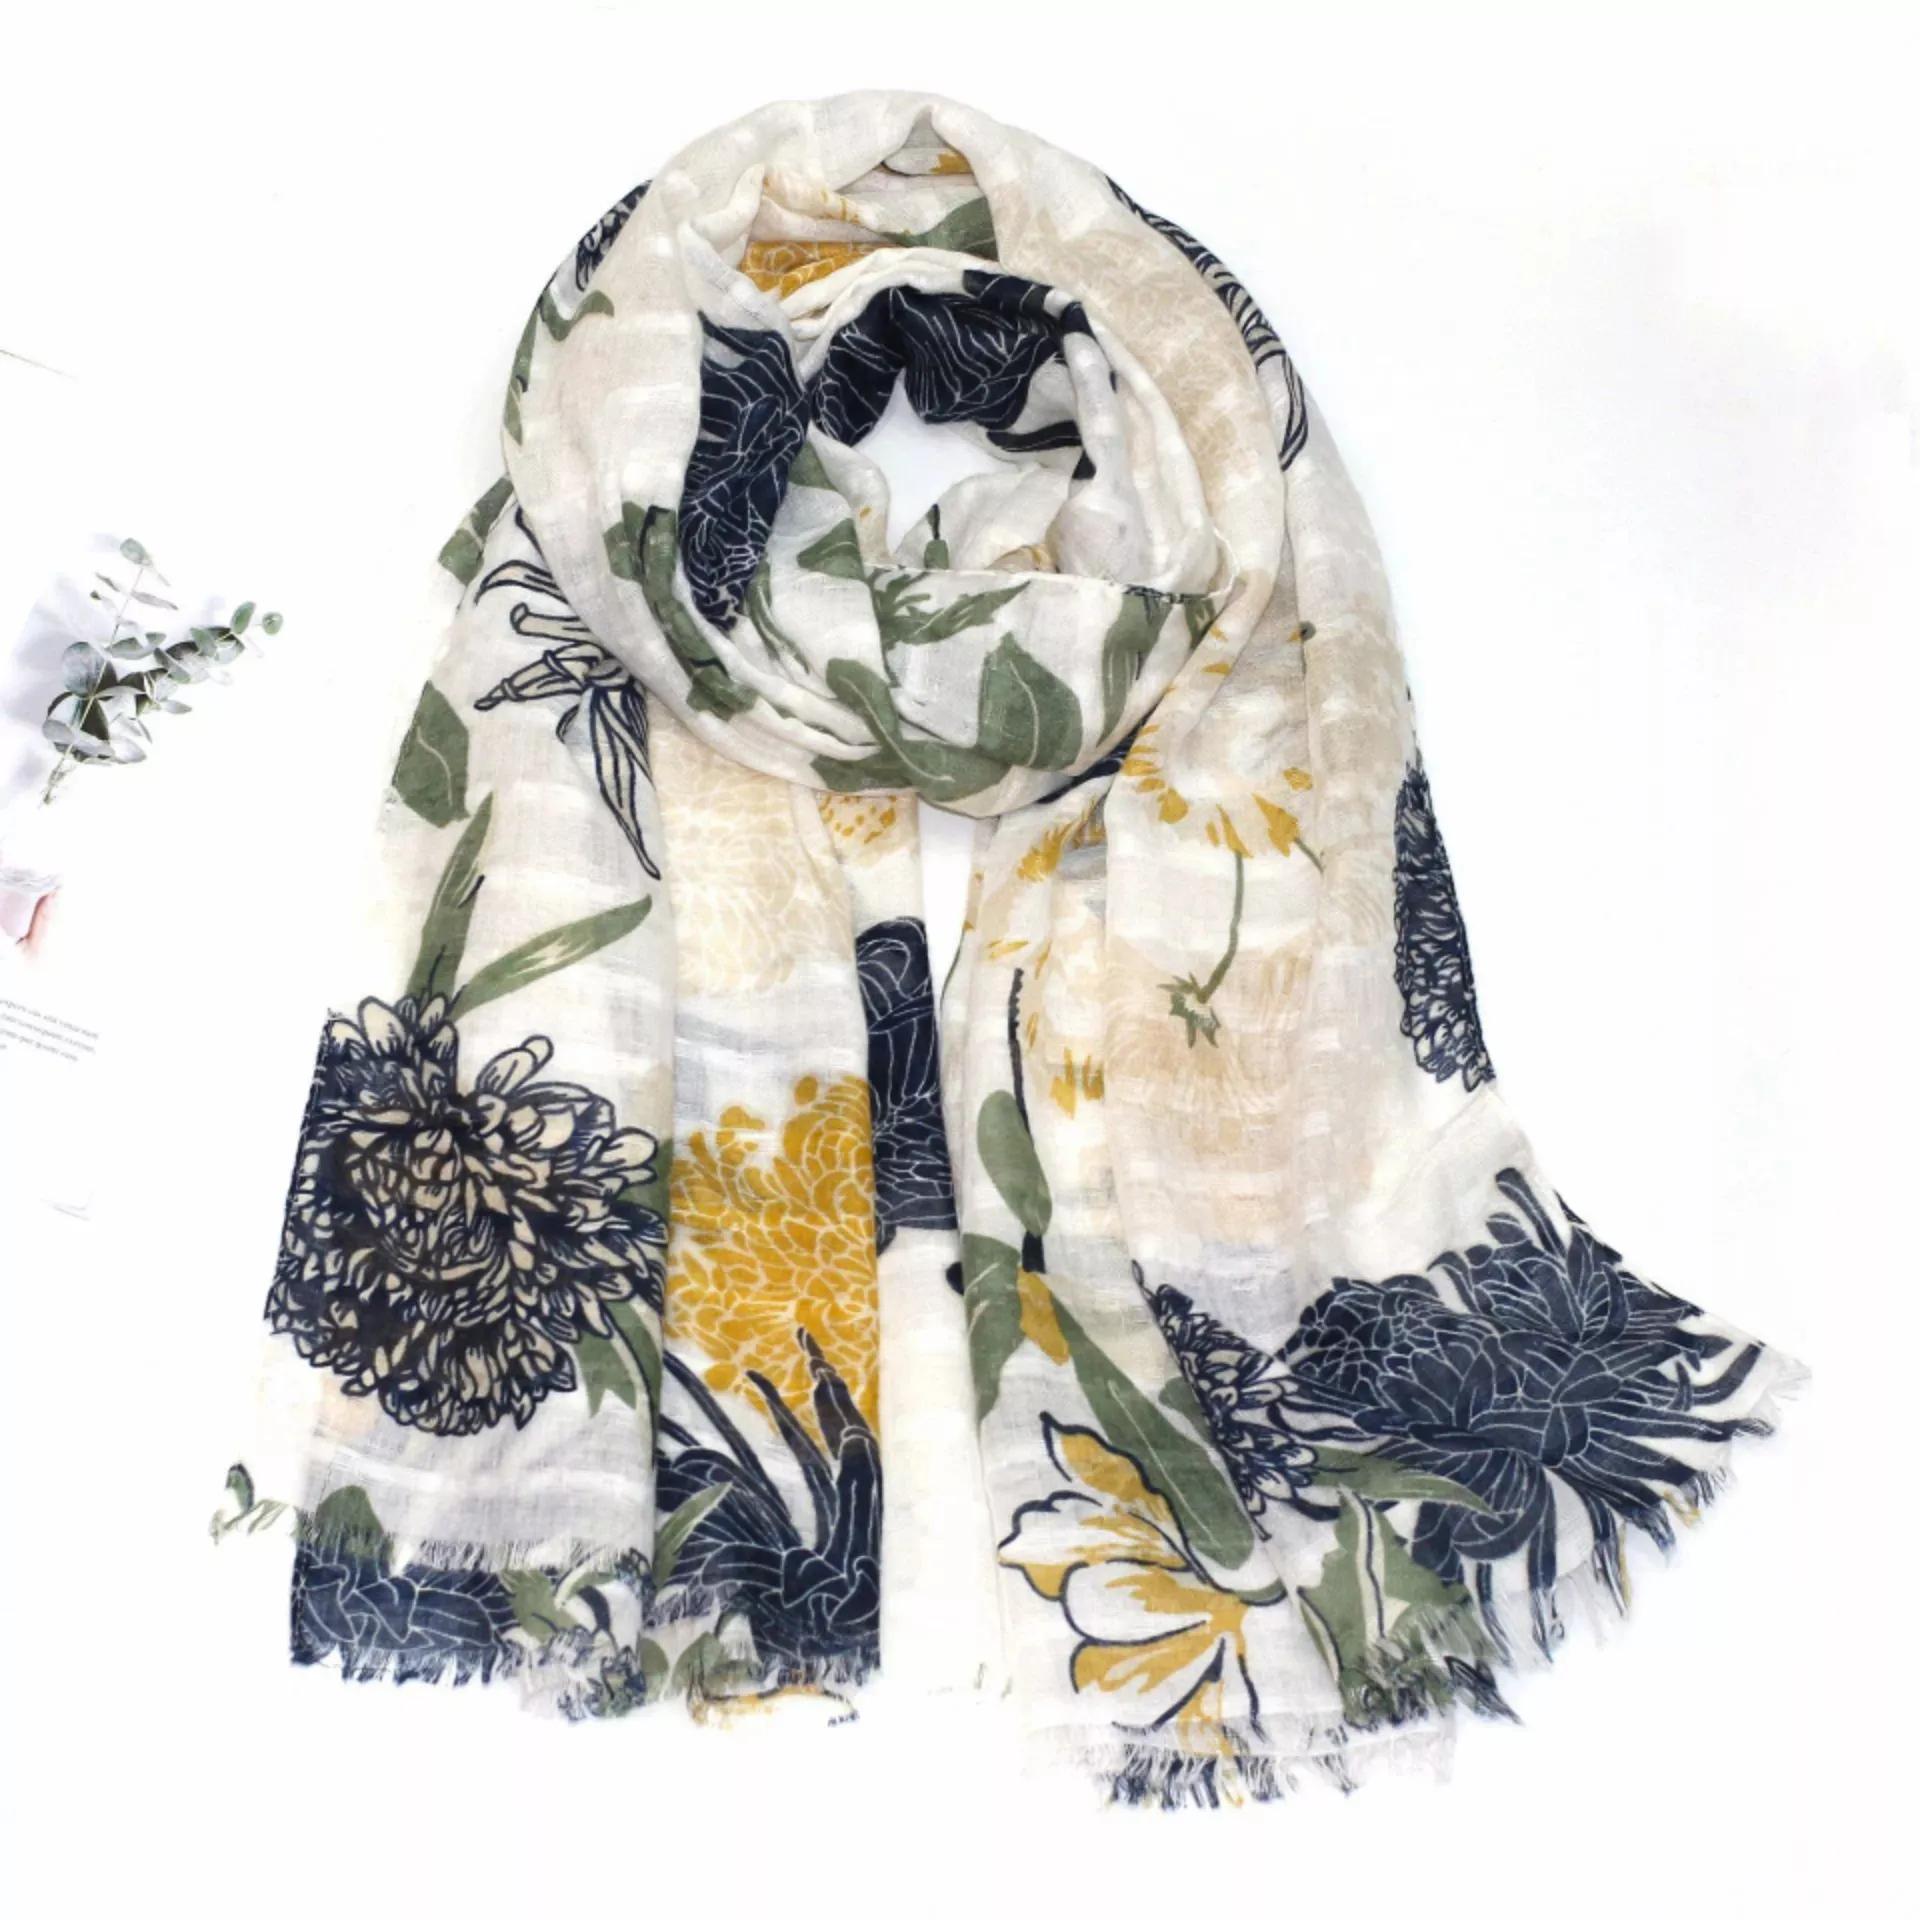 Cotton Cashmere Scarf Tropical Beach Style Cashmere Scarf Designer Cotton Muslim Scarf Pashmina Printed Scarf